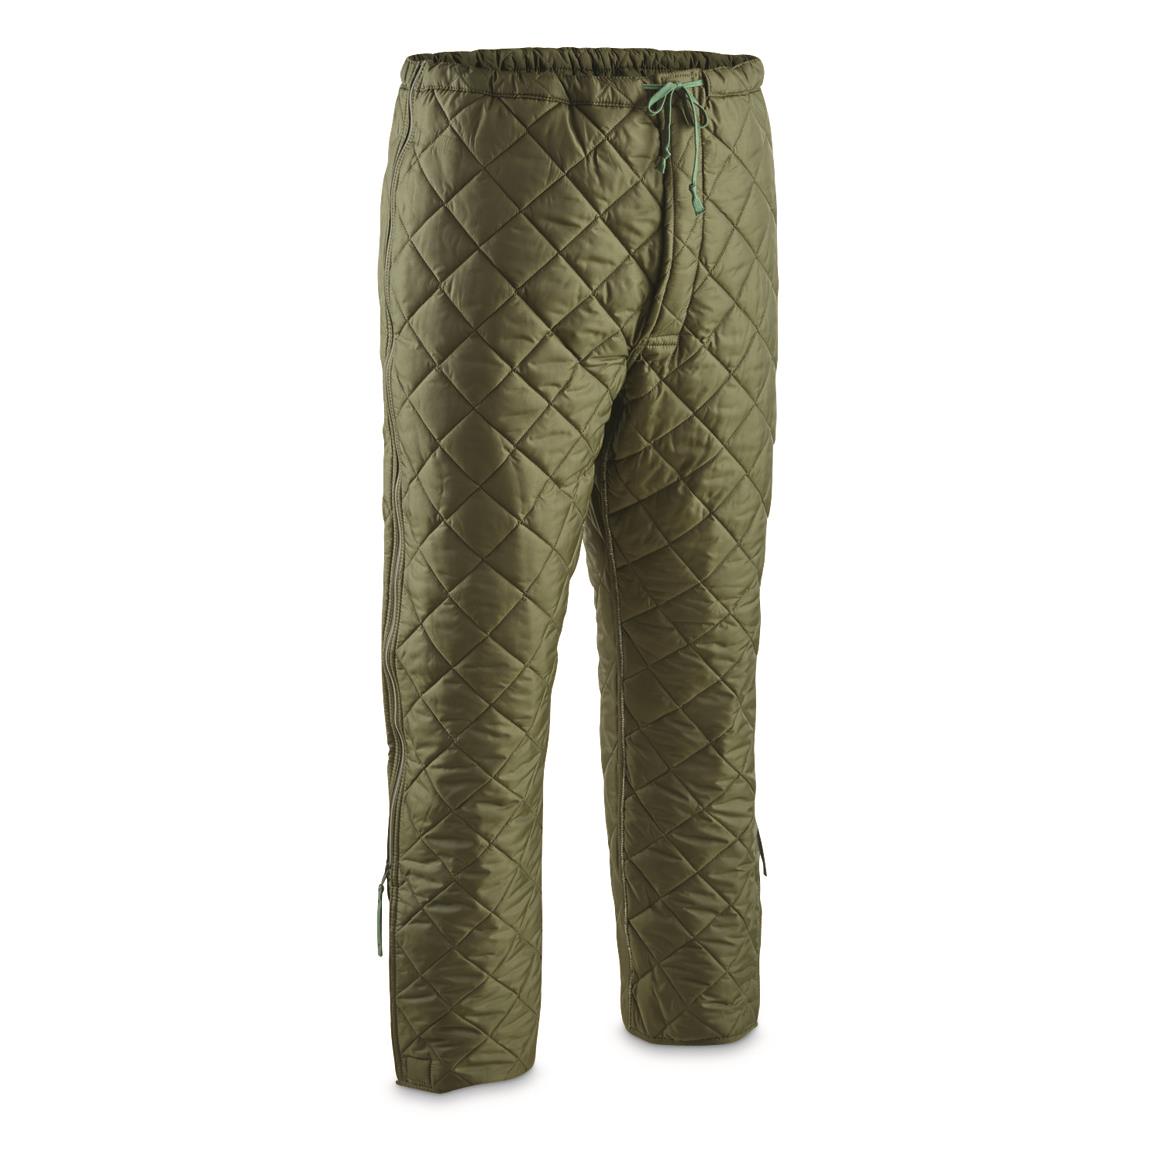 British Military Surplus Quilted Cold Weather Pants Liner, New - 707227, Military & Tactical ...